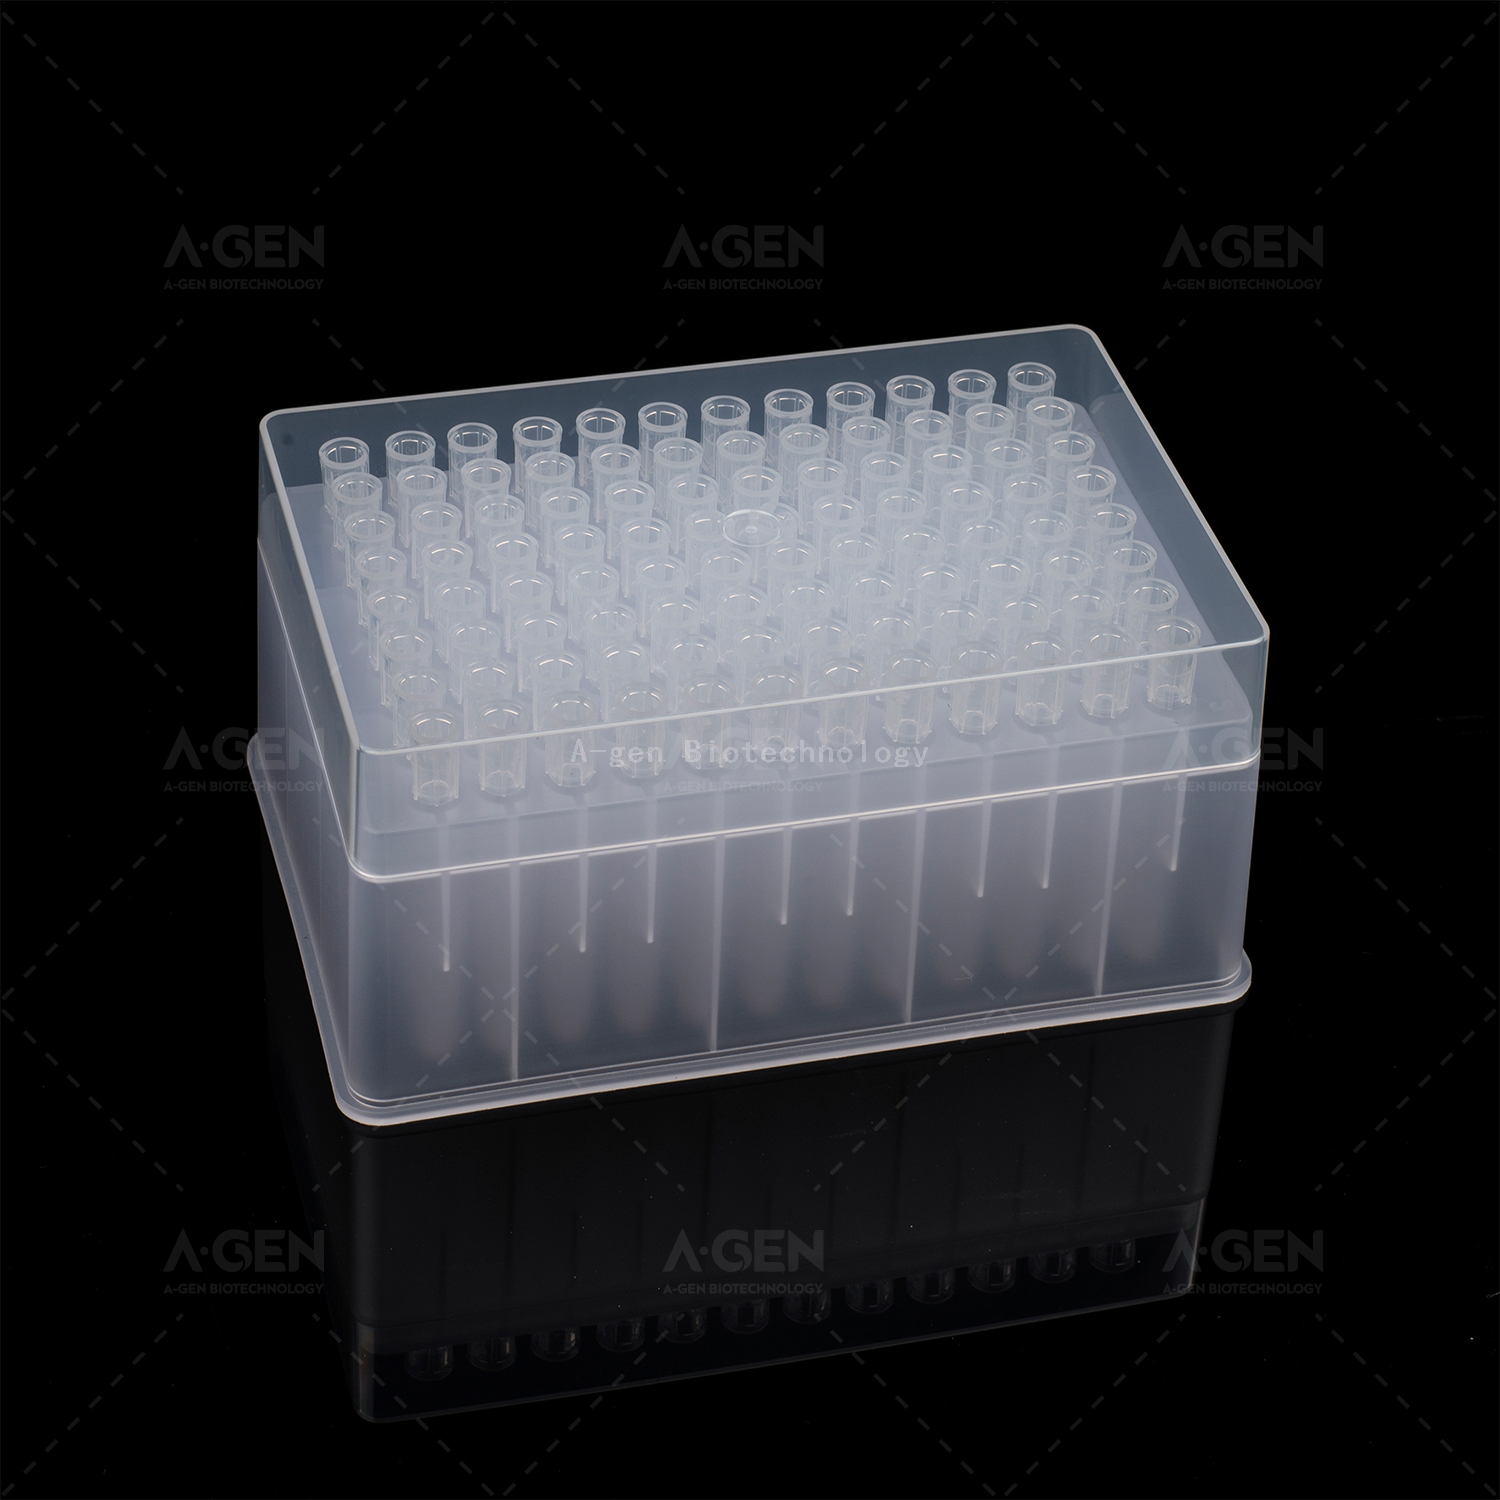 Nayo Tips 50μL Clear Robotic PP Pipette Tip (Racked,sterilized) for DNA/RNA Extraction No Filter FX-50-RS